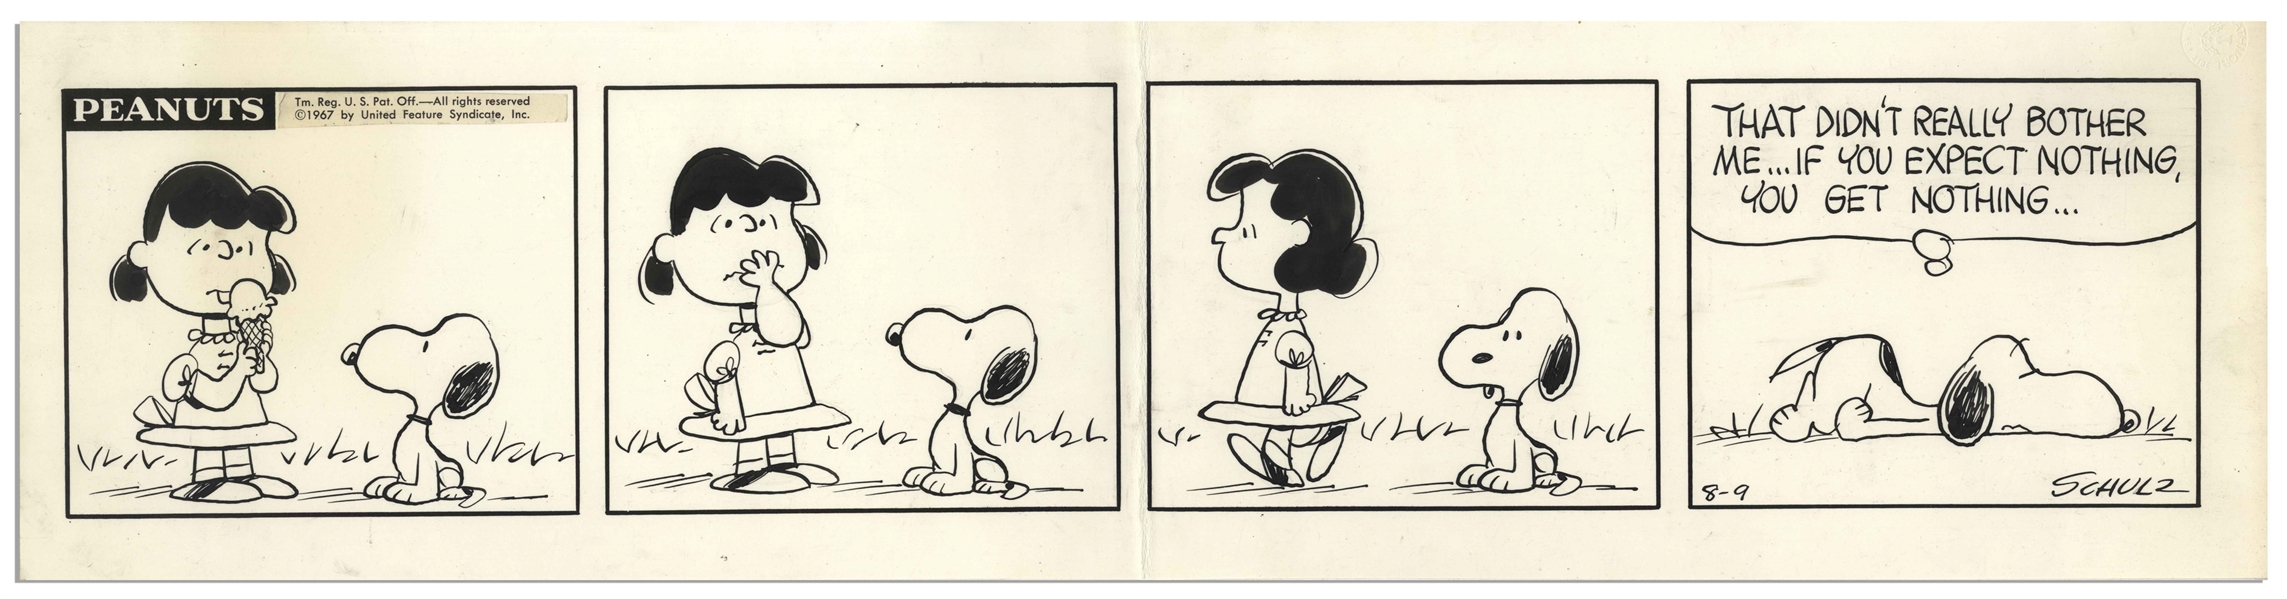 Charles Schulz Original Hand-Drawn ''Peanuts'' Comic Strip -- Snoopy Is Sad That He Doesn't Get Any Ice Cream